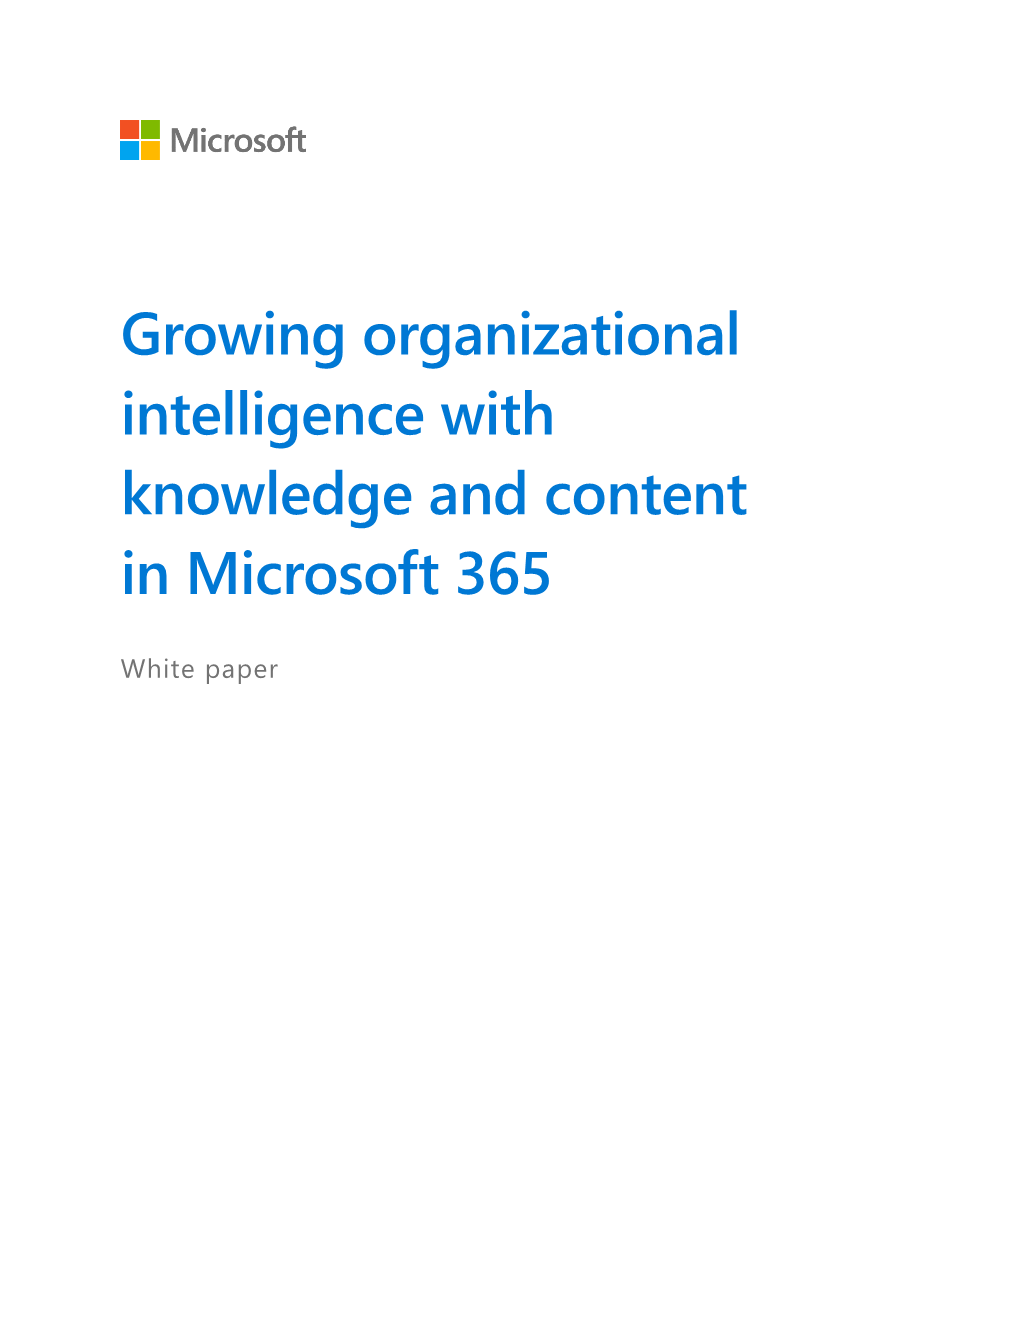 Growing Organizational Intelligence with Knowledge and Content in Microsoft 365